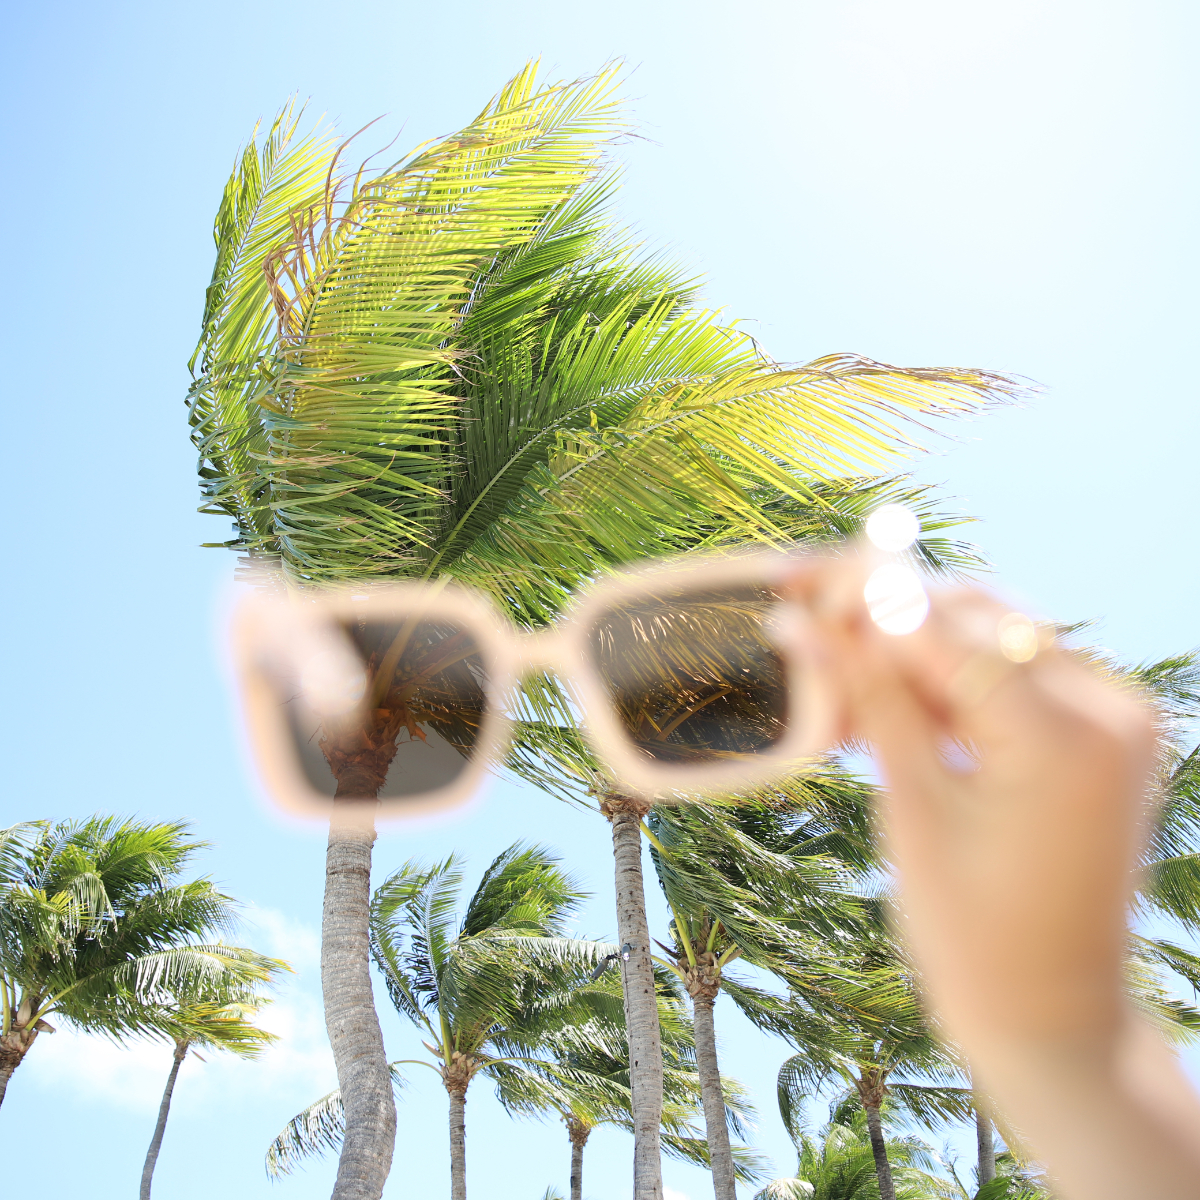 Pair of sunglasses held up to show a palm tree and a sky behind the lenses